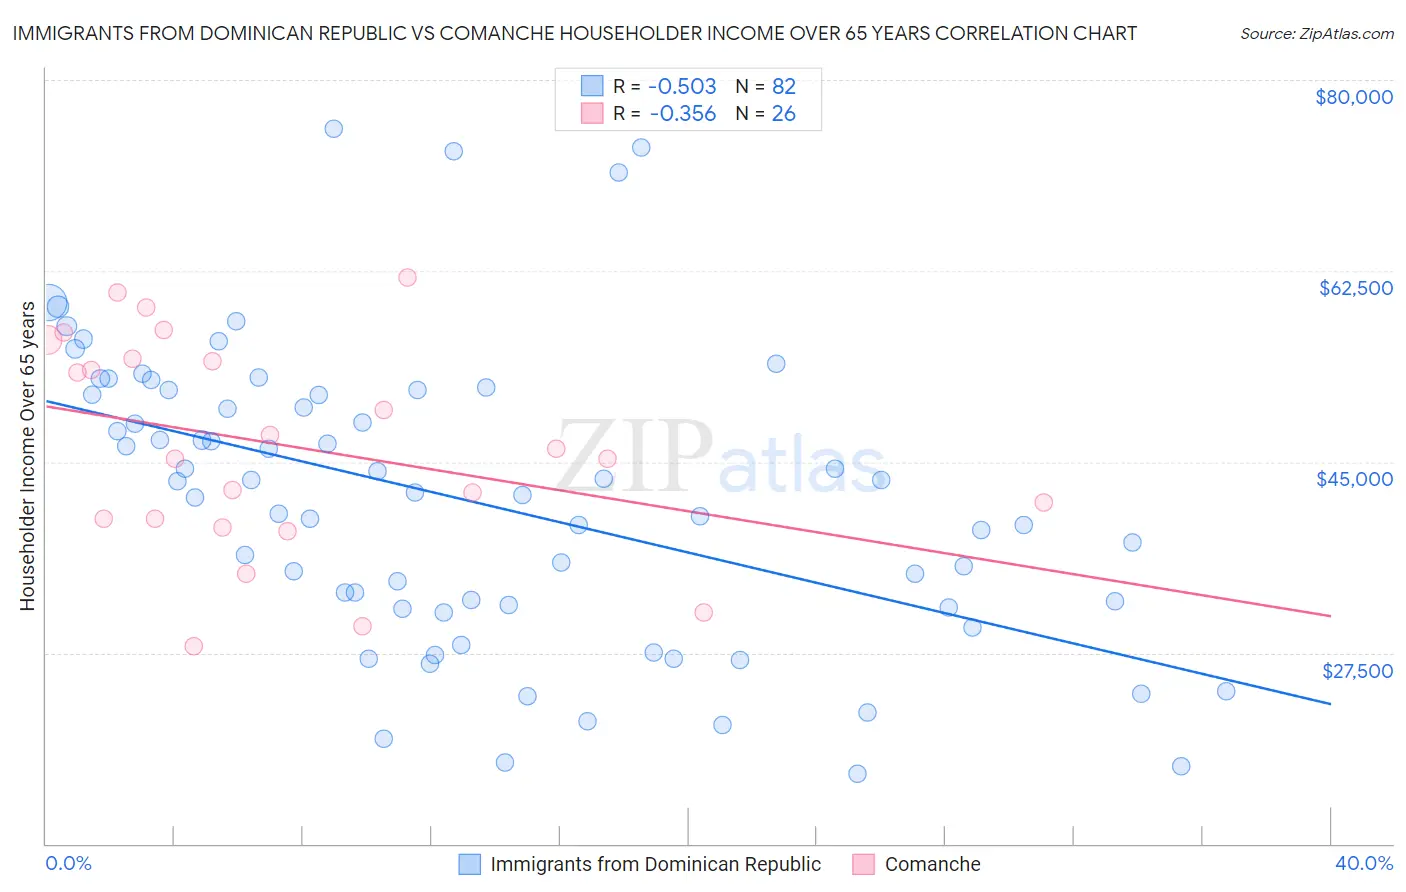 Immigrants from Dominican Republic vs Comanche Householder Income Over 65 years